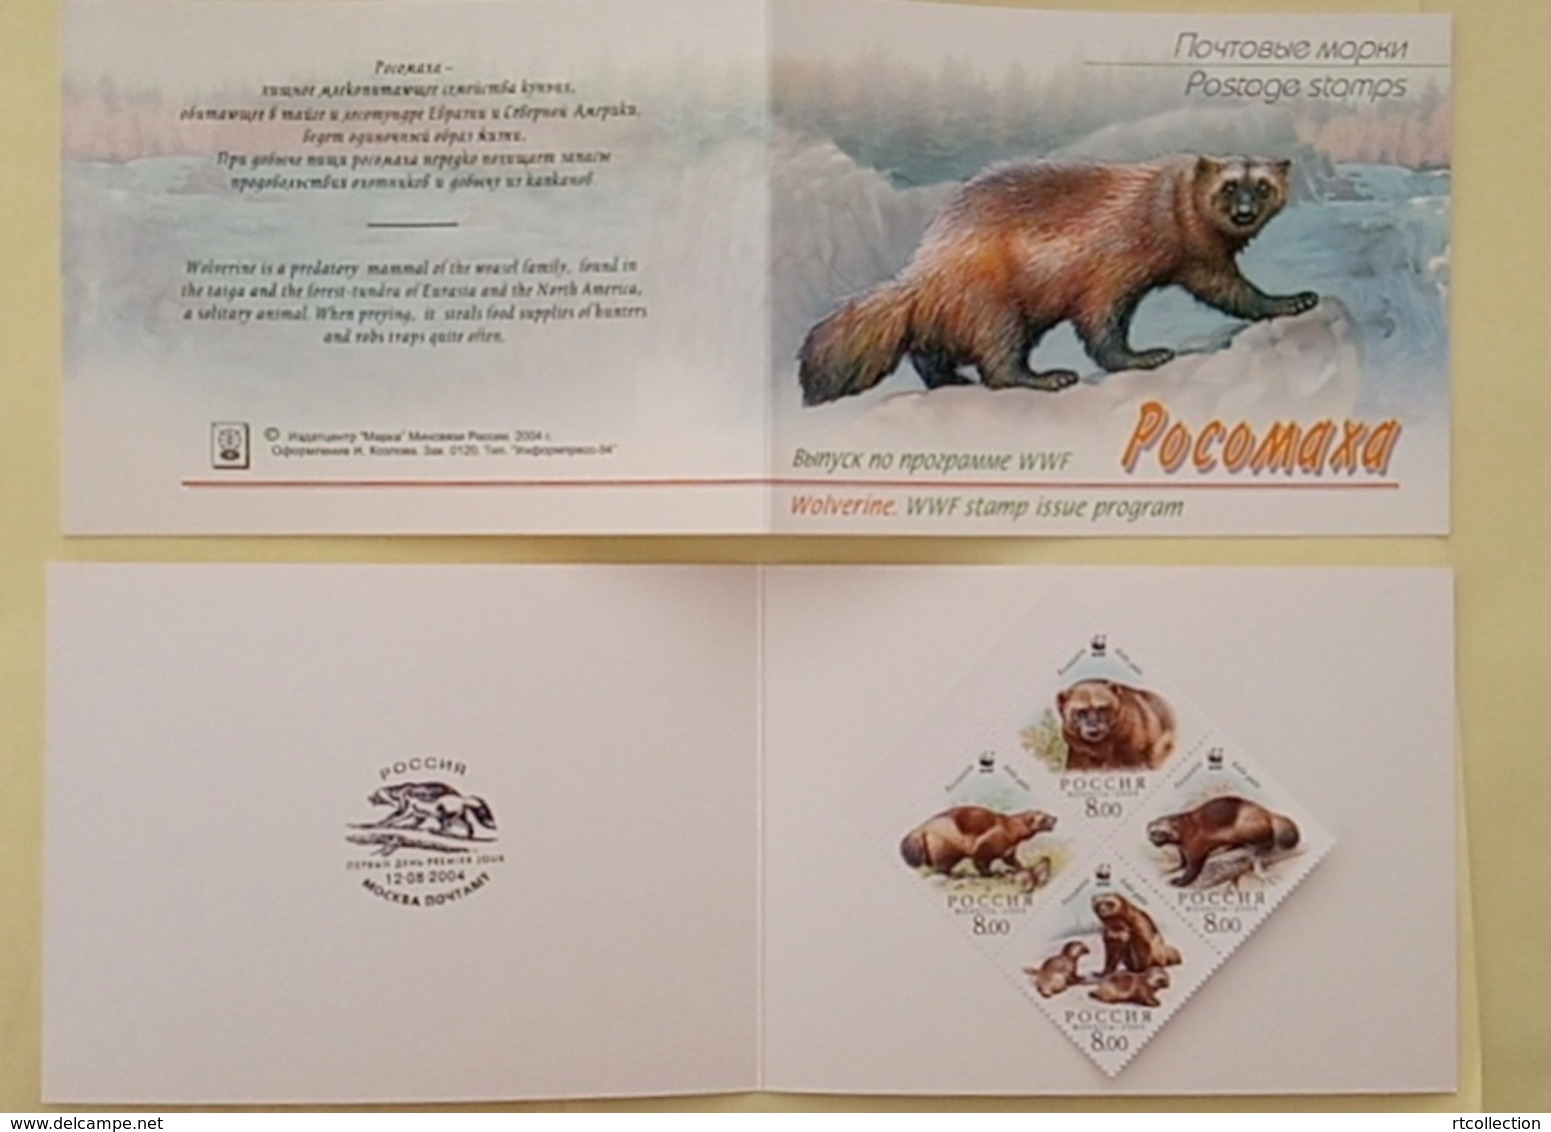 Russia 2004 Booklet WWF W.W.F. Wolverine Bear Animals Mammals Bears World Wildlife Fund Organizations Stamps MNH - Collections, Lots & Series